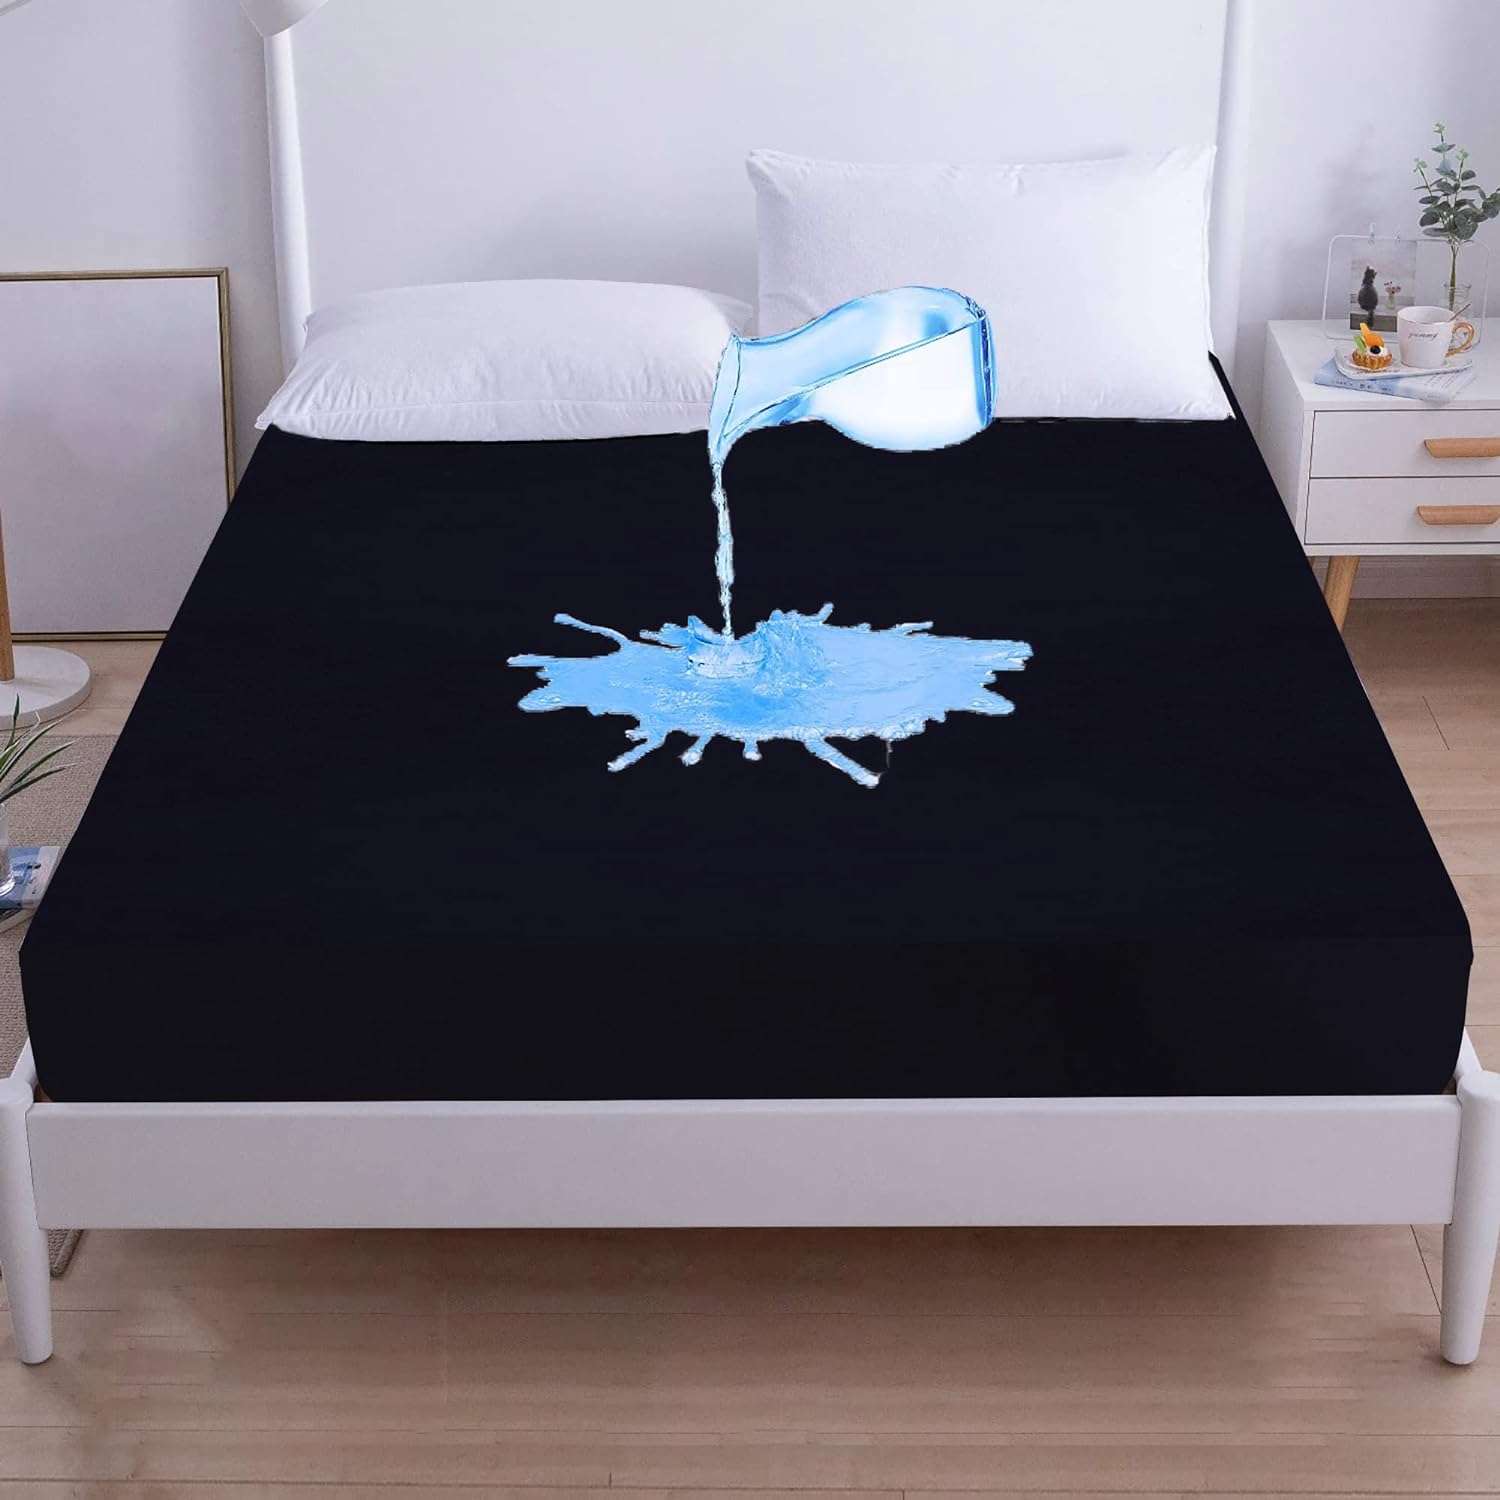 waterproof Double Bed mattress cover